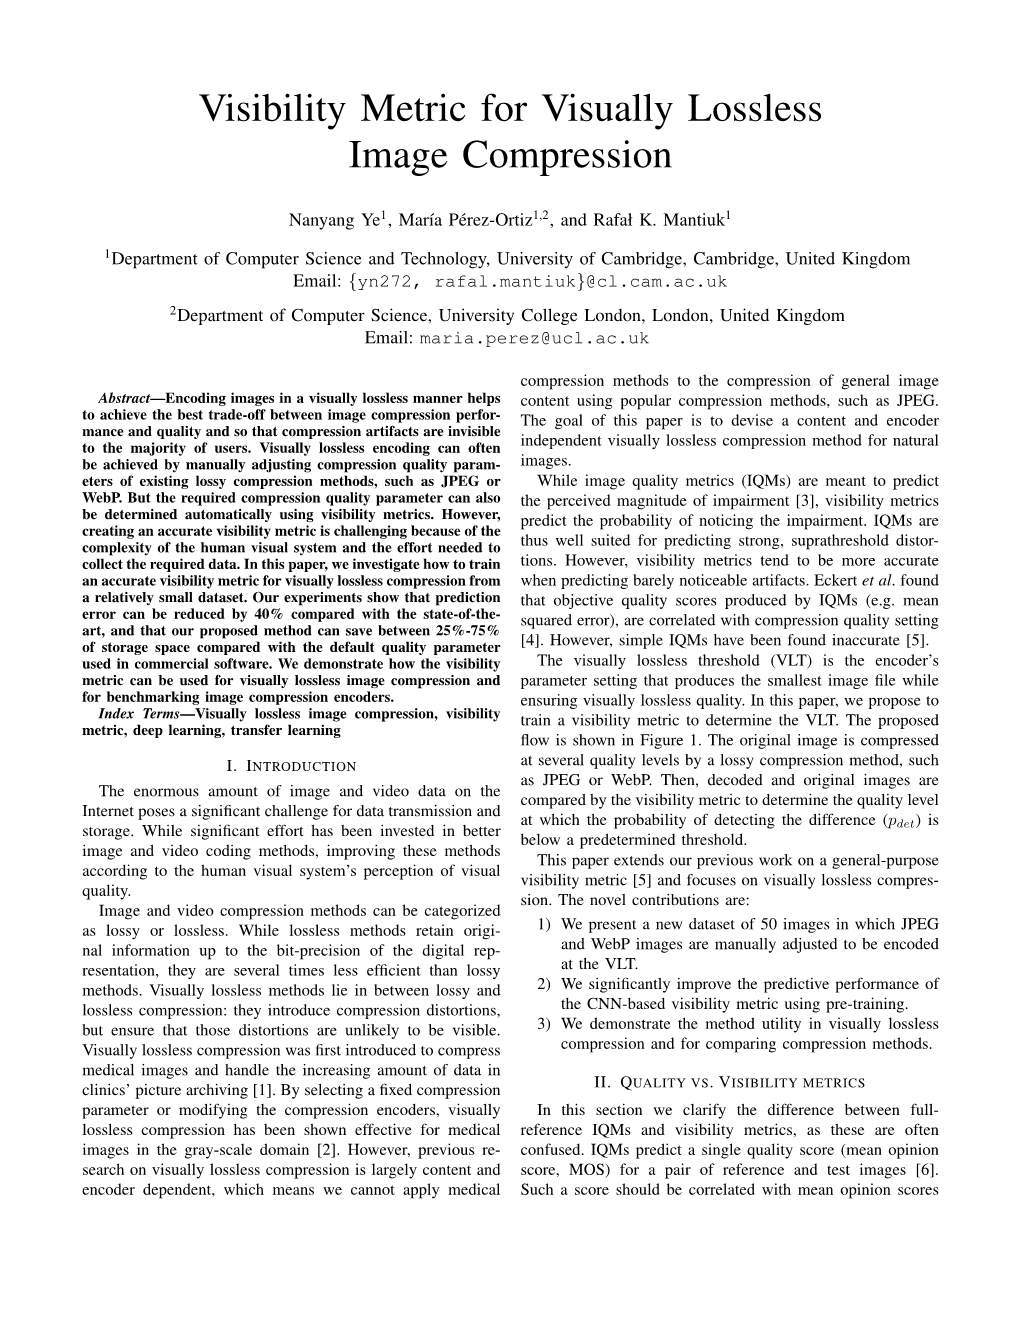 Visibility Metric for Visually Lossless Image Compression